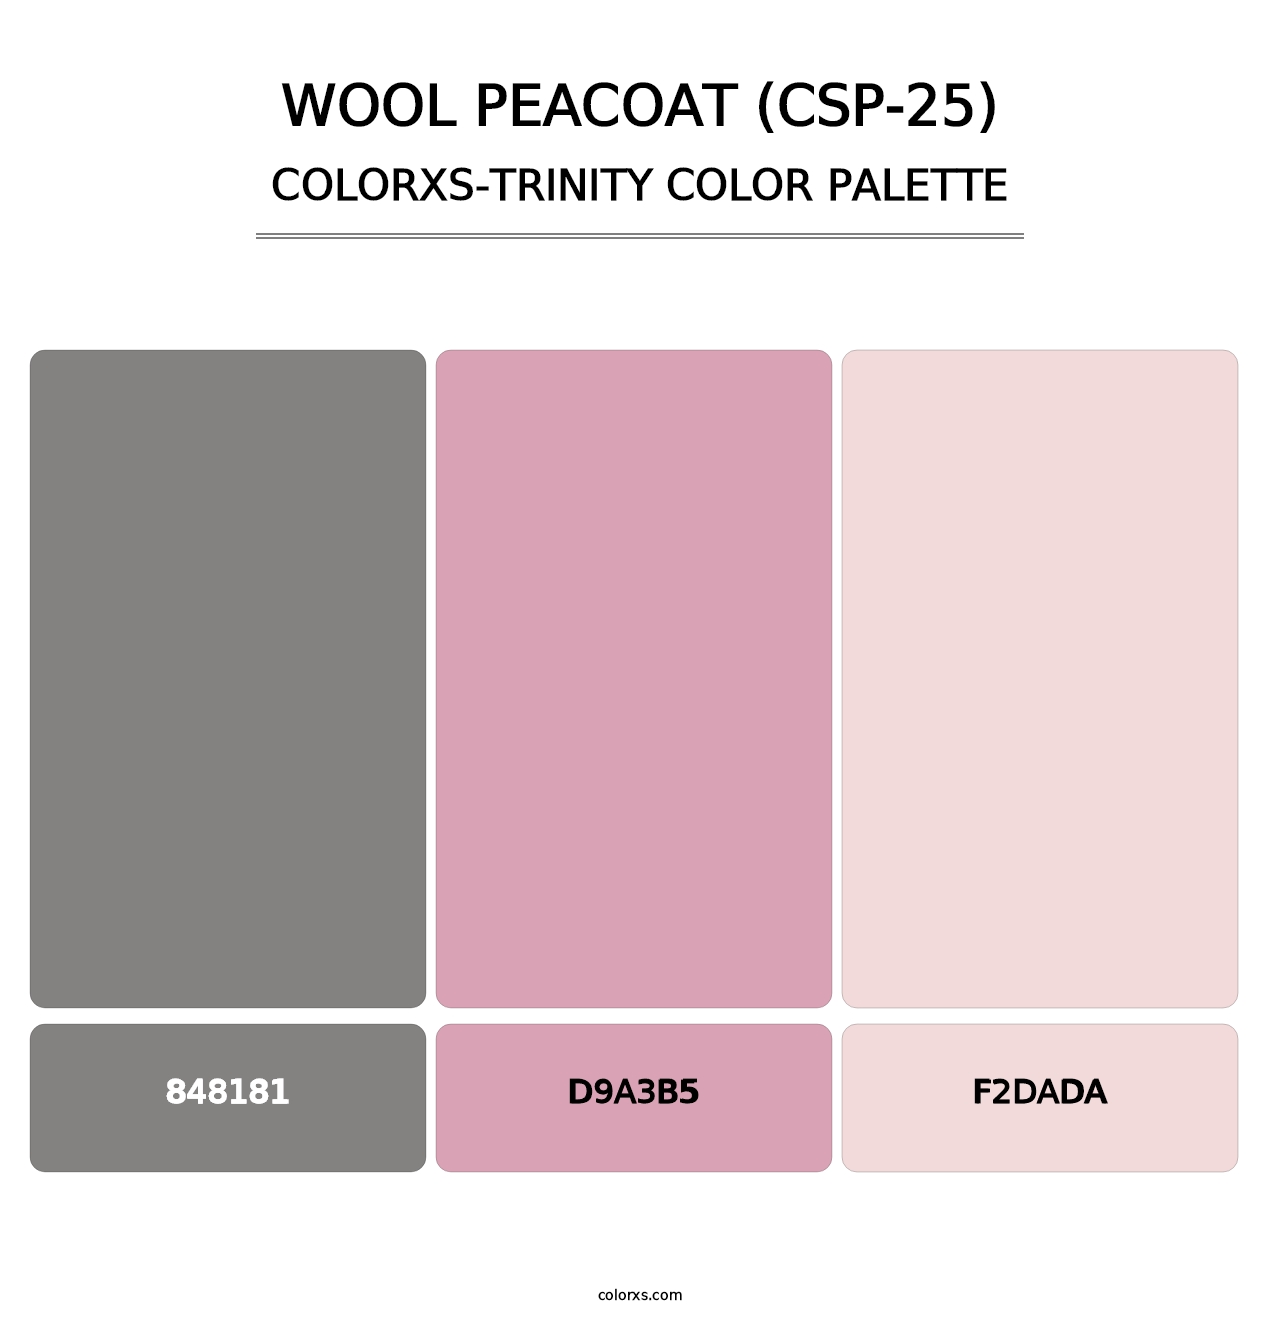 Wool Peacoat (CSP-25) - Colorxs Trinity Palette